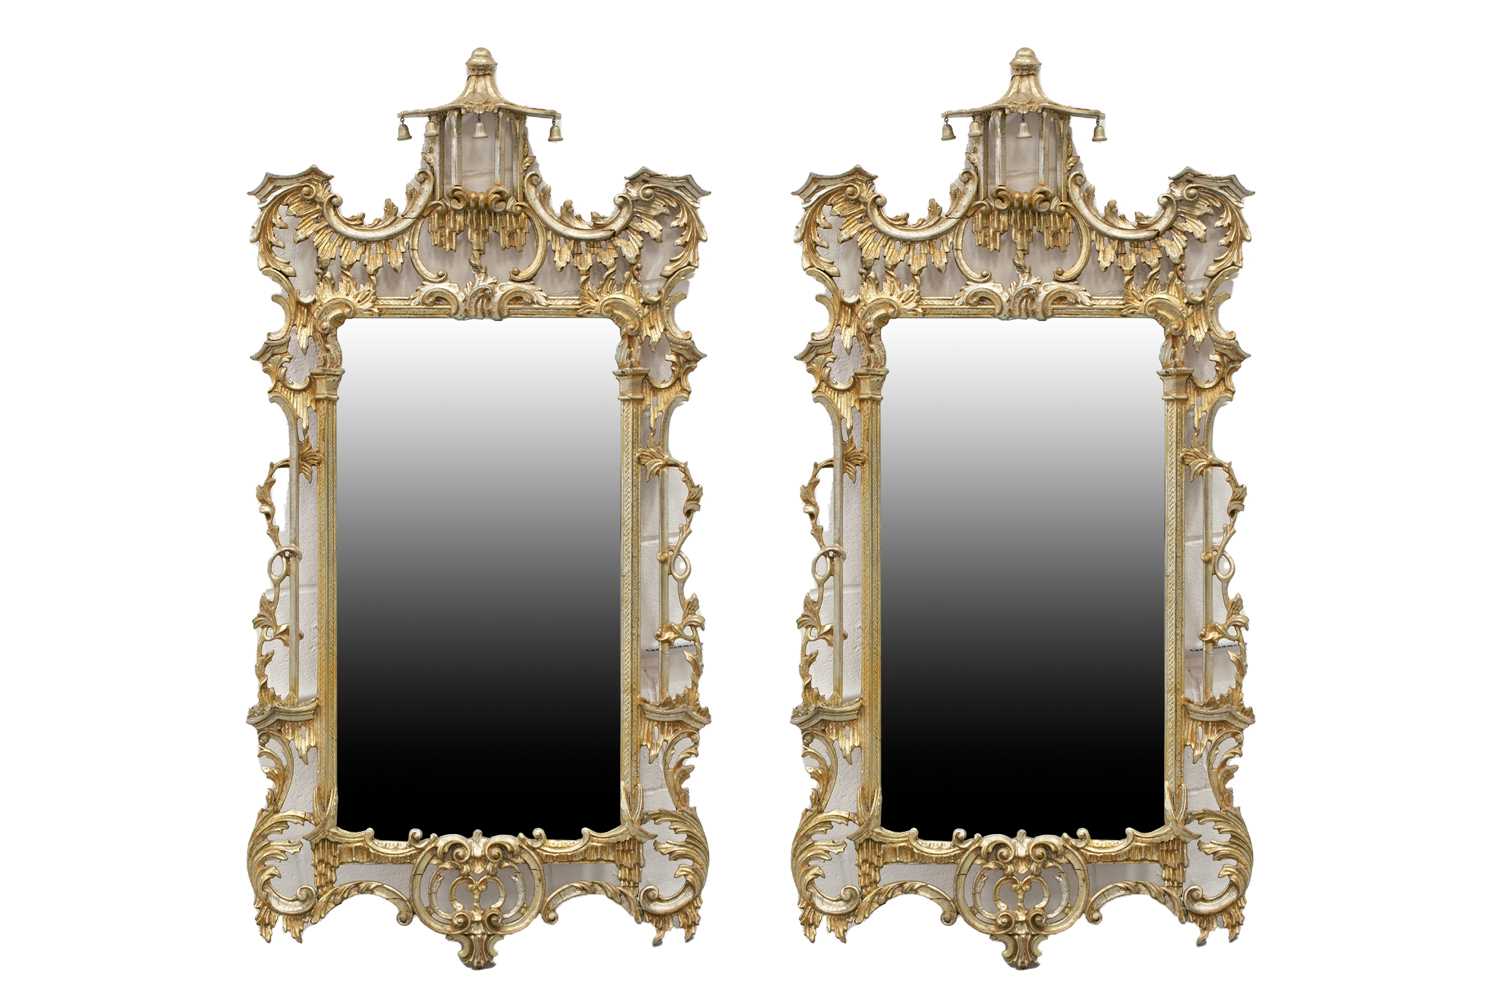 A pair of 'Chinese Chippendale' style carved, pierced wood and gilt gesso wall mirrors, 20th